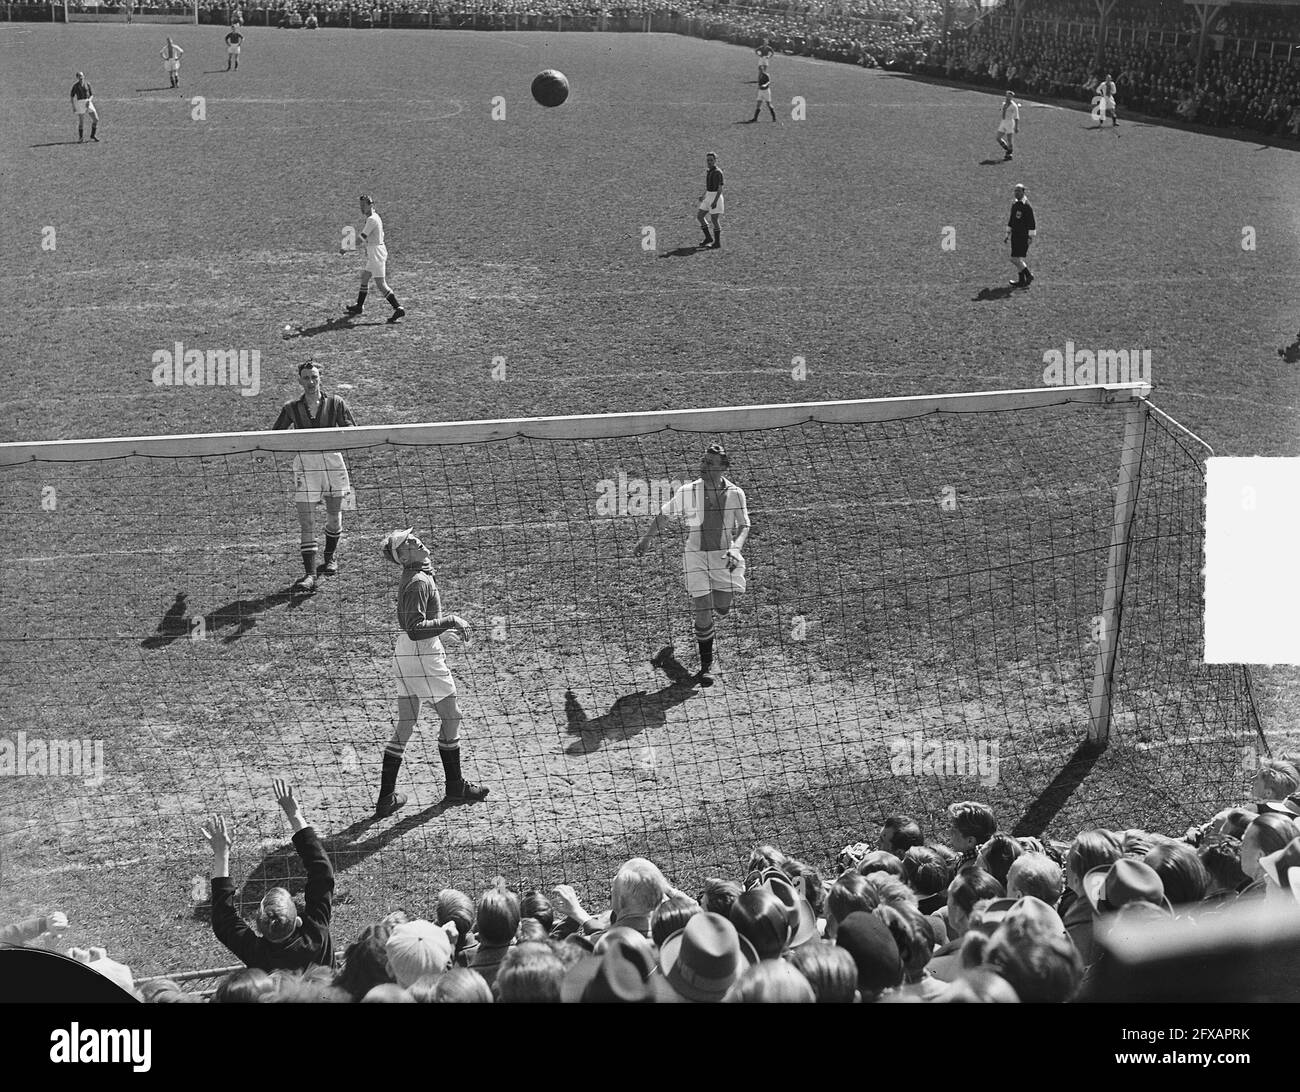 DWS against Ajax 3-0, April 22, 1951, sports, soccer, The Netherlands, 20th century press agency photo, news to remember, documentary, historic photography 1945-1990, visual stories, human history of the Twentieth Century, capturing moments in time Stock Photo